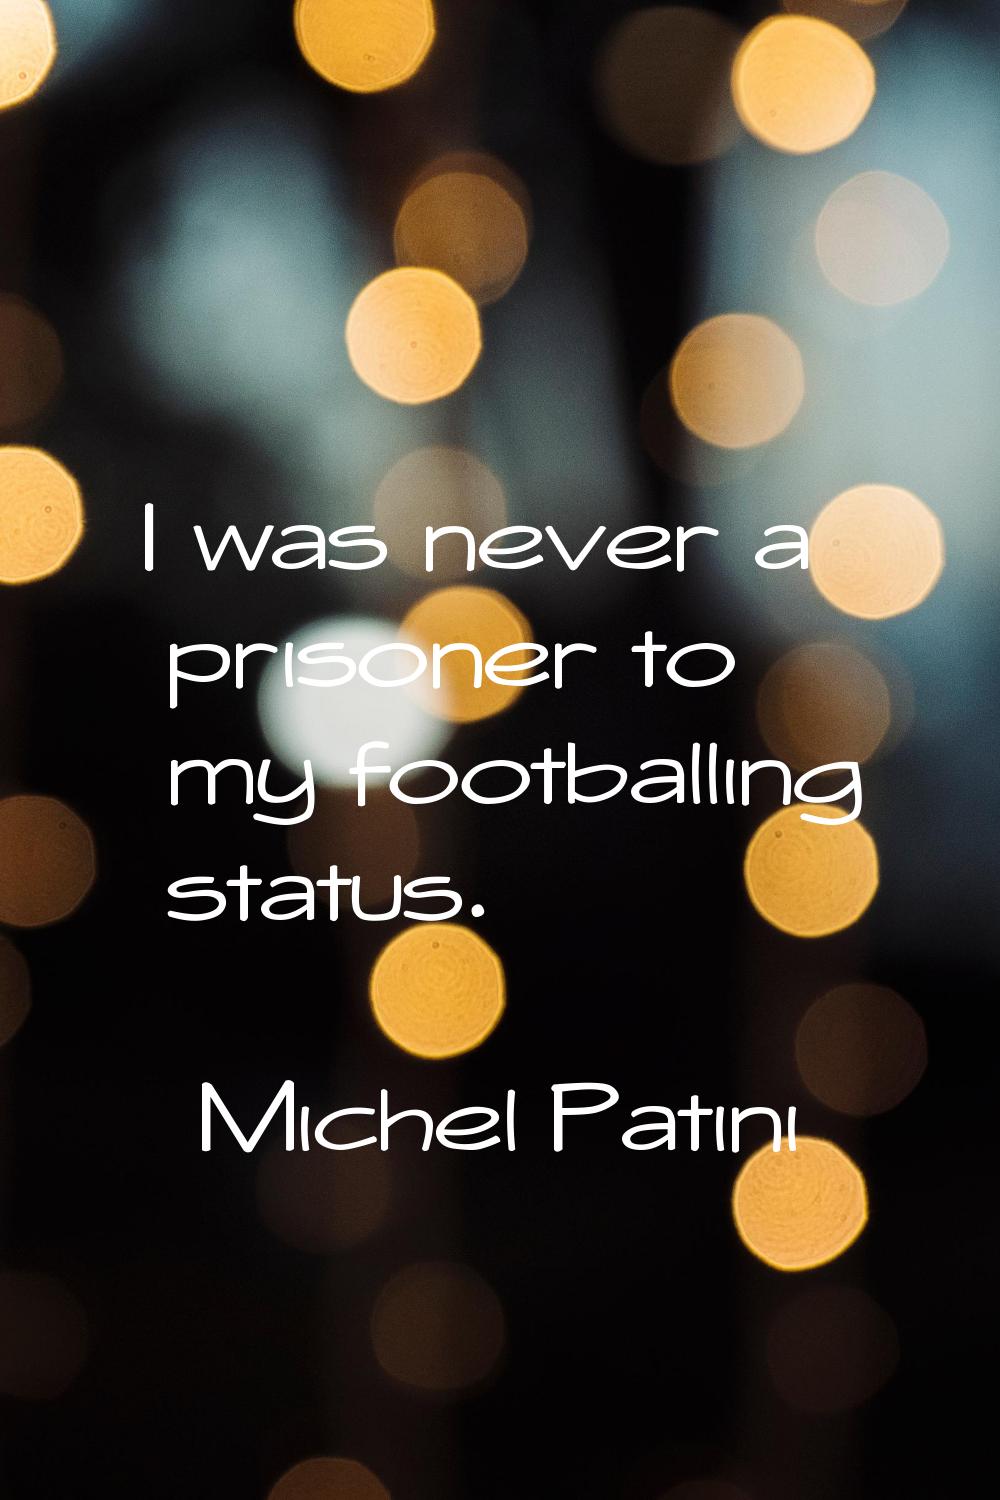 I was never a prisoner to my footballing status.